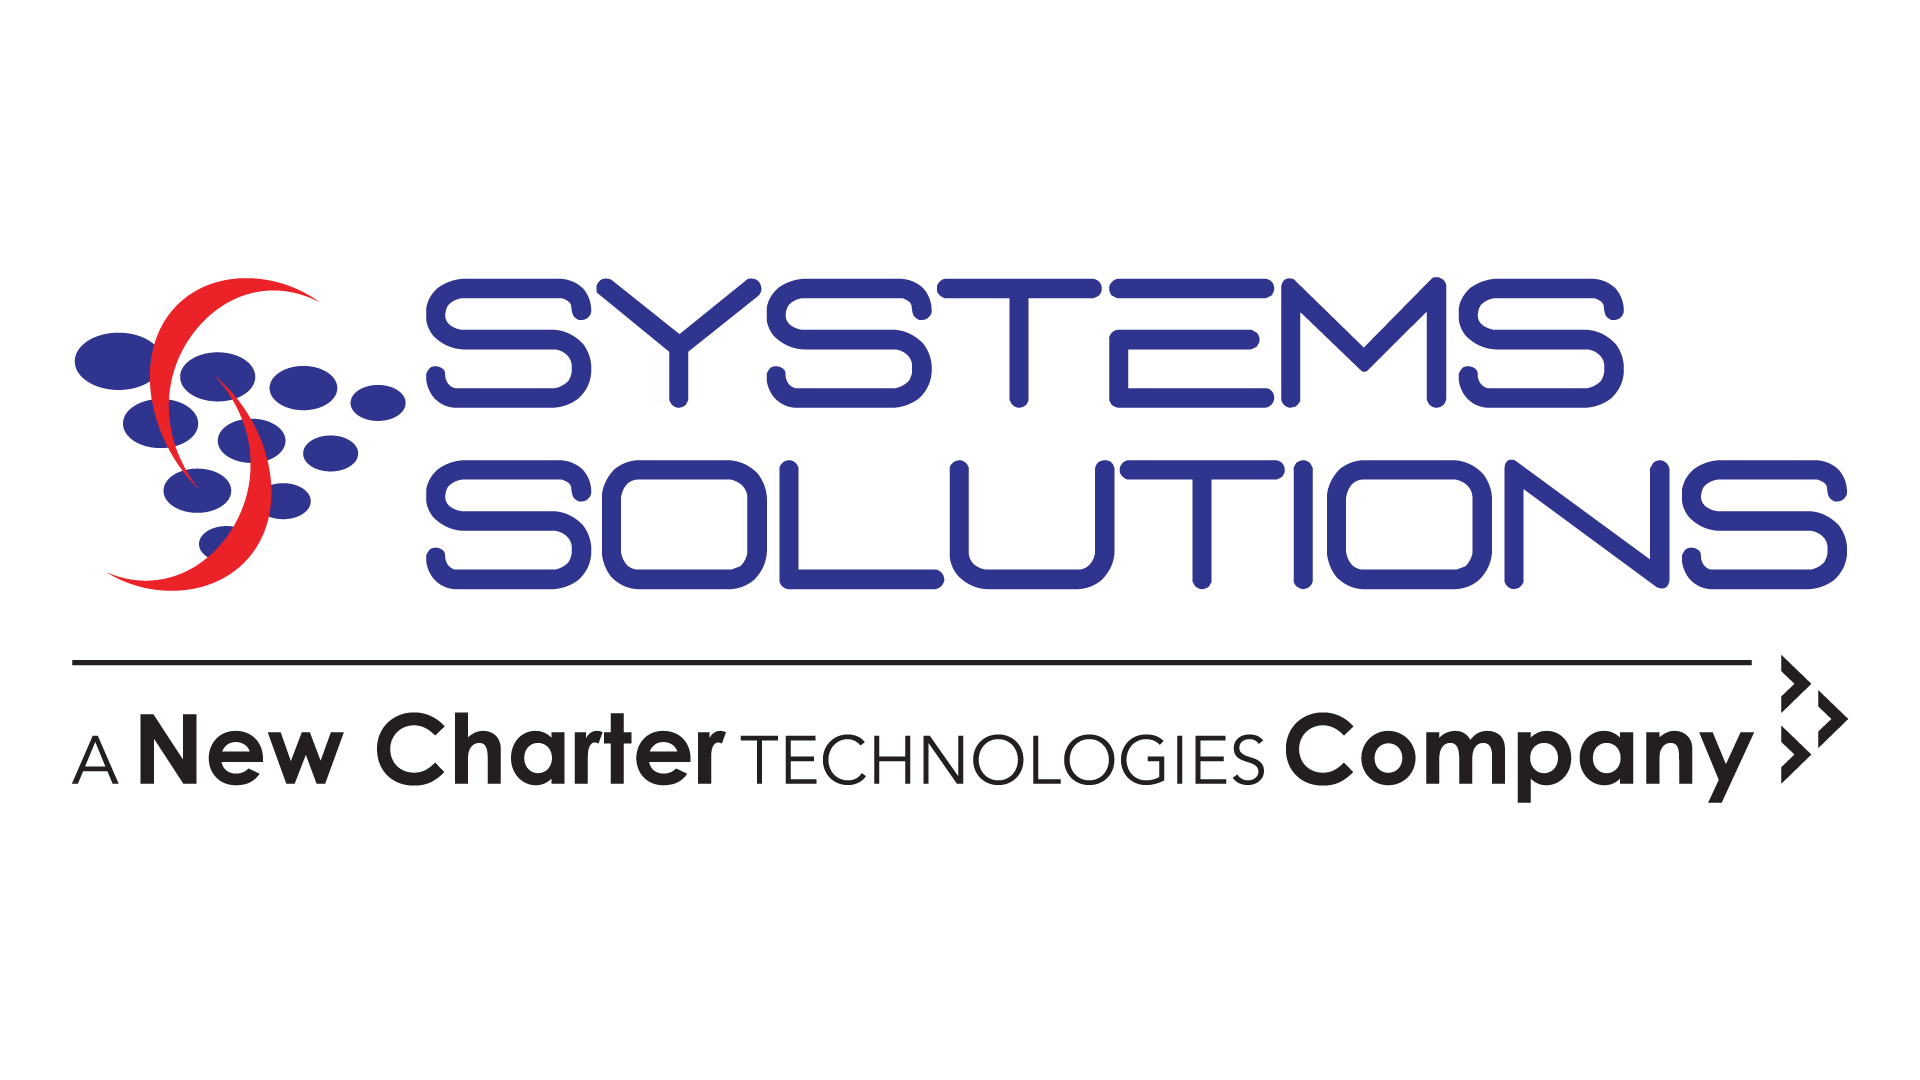 Systems Solutions - Standard Black